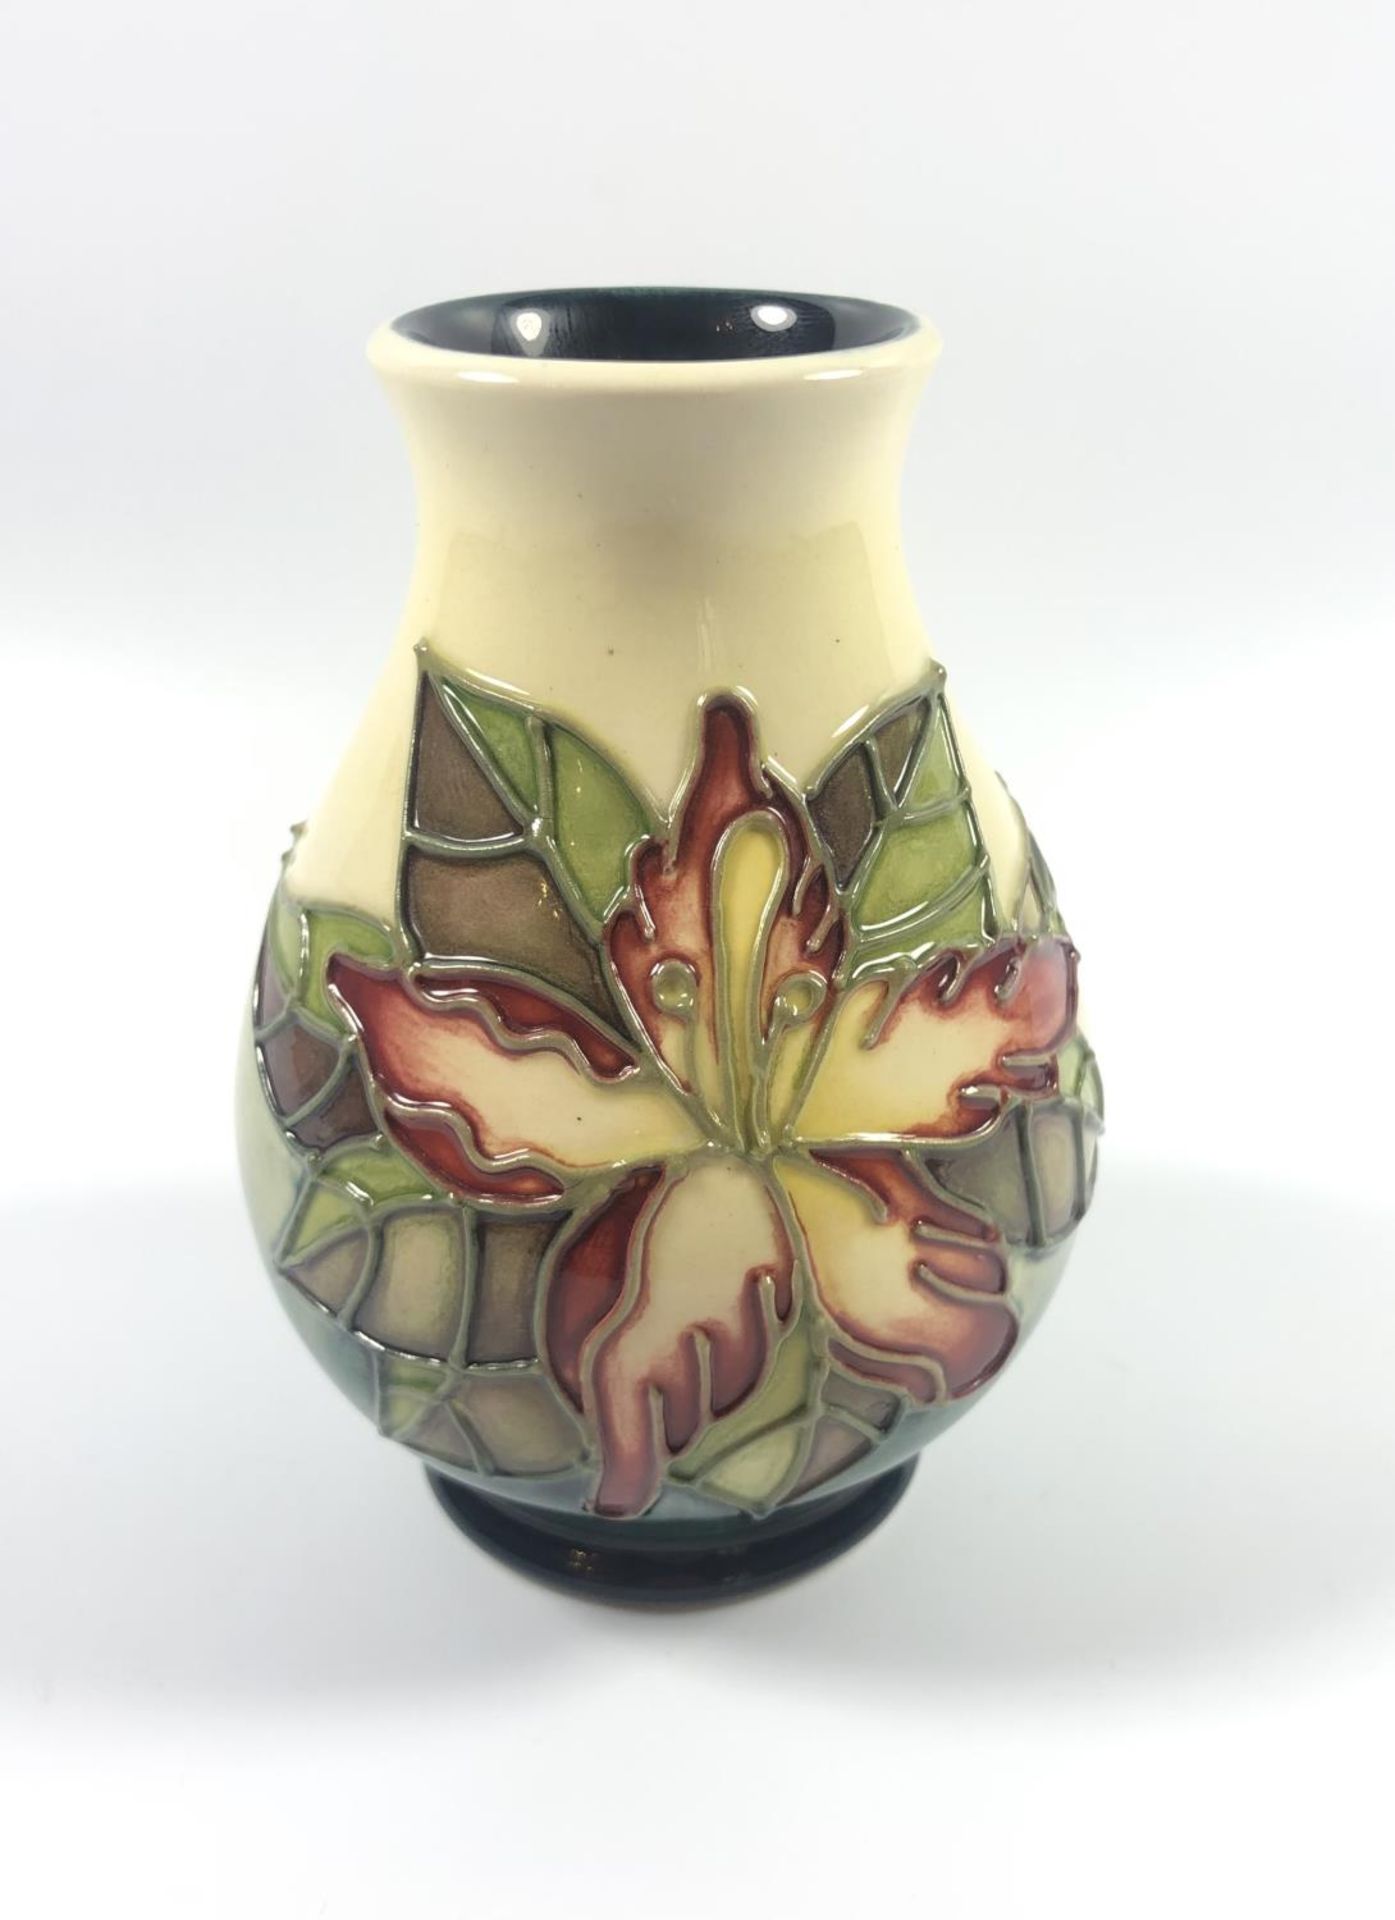 A MOORCROFT POTTERY TRAINING TRIAL PATTERN VASE, DATED 1999, HEIGHT 10CM (FIRSTS)